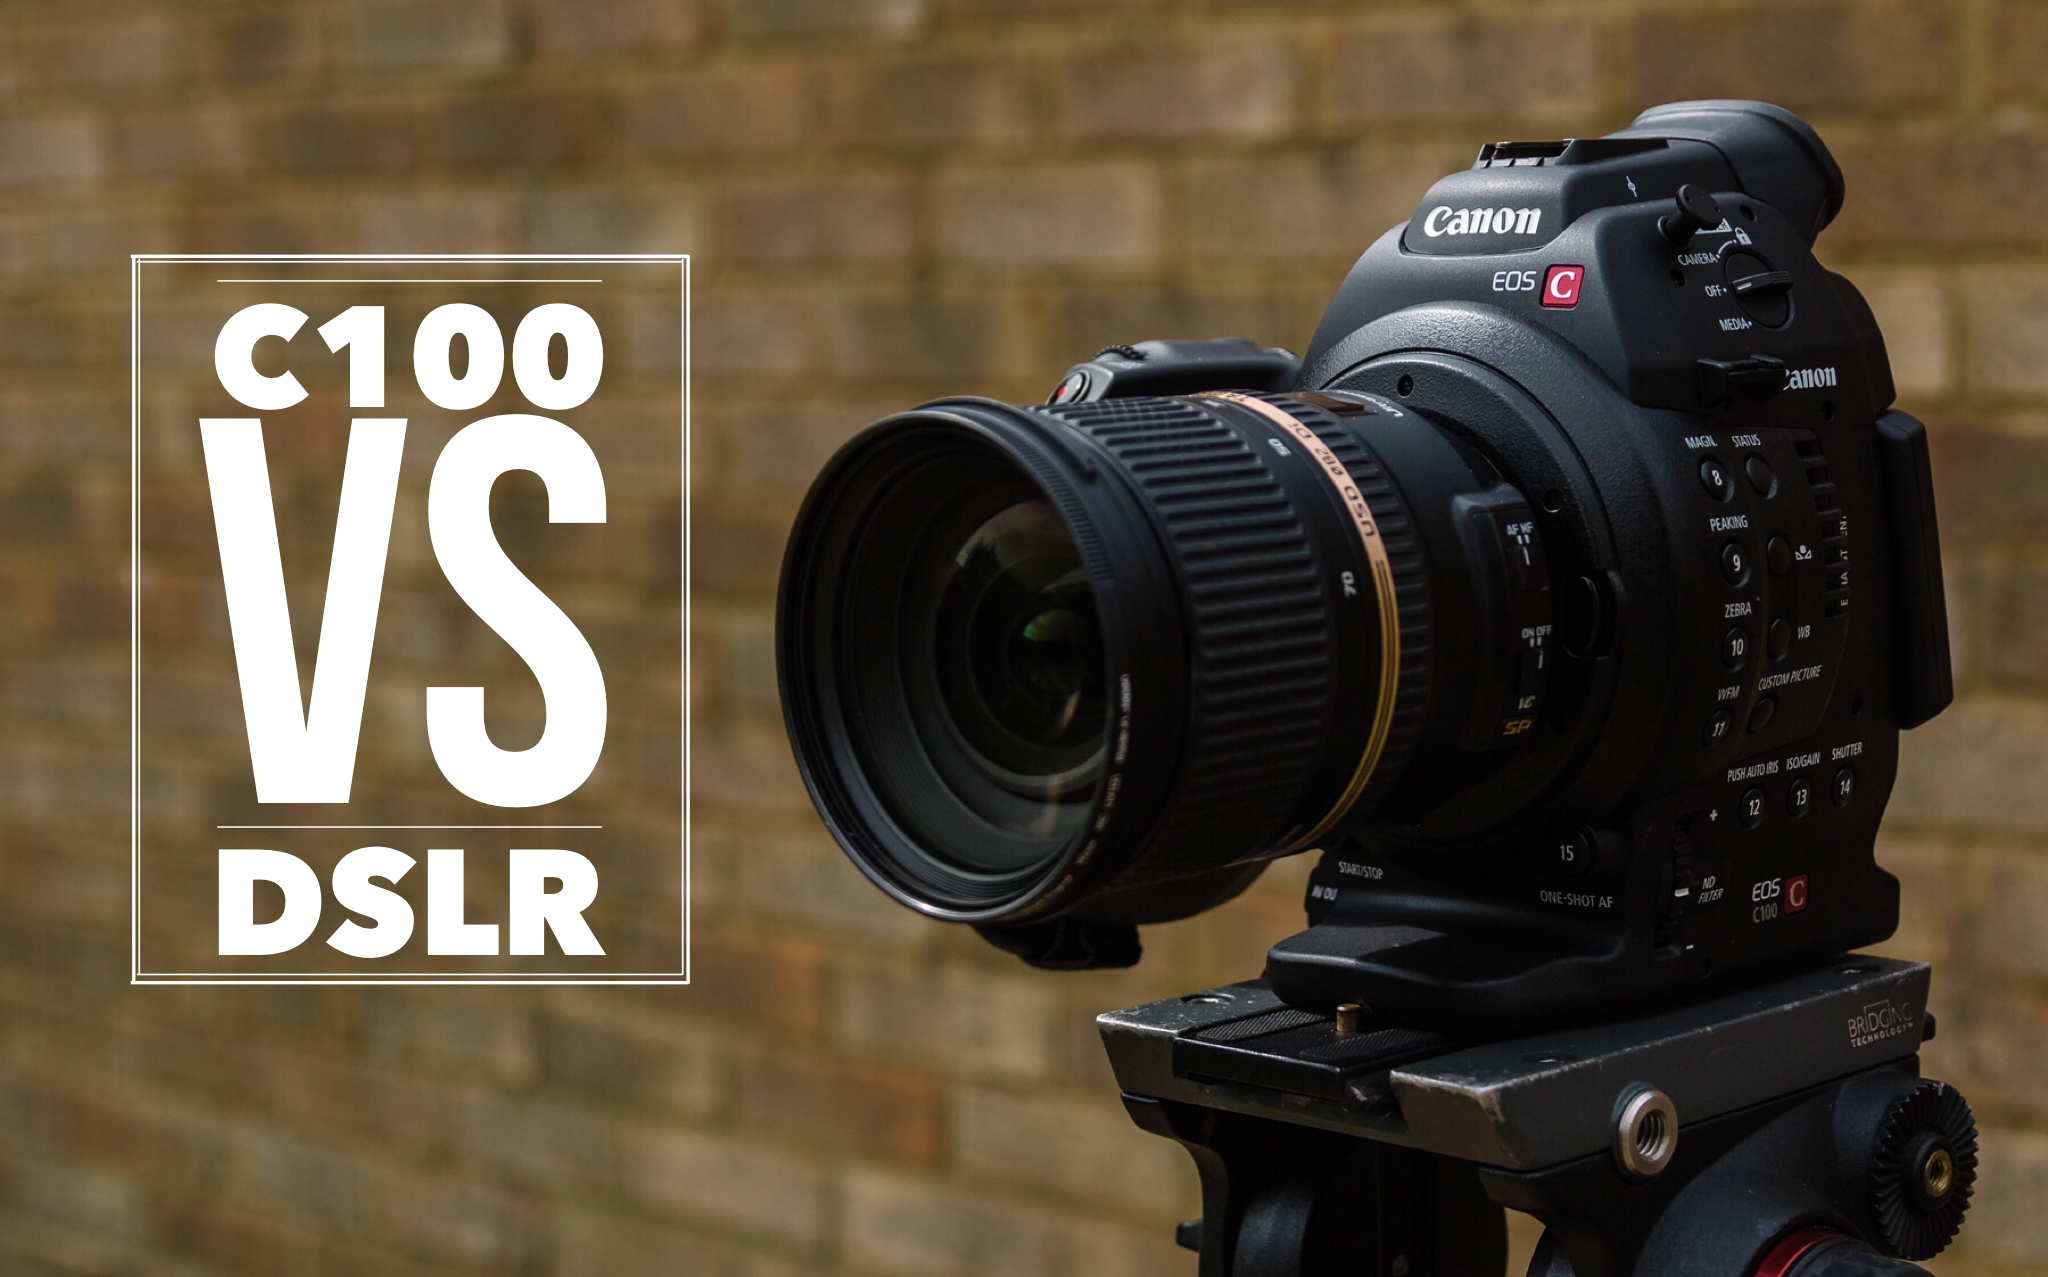 Why I bought the Canon C100 instead of a DSLR